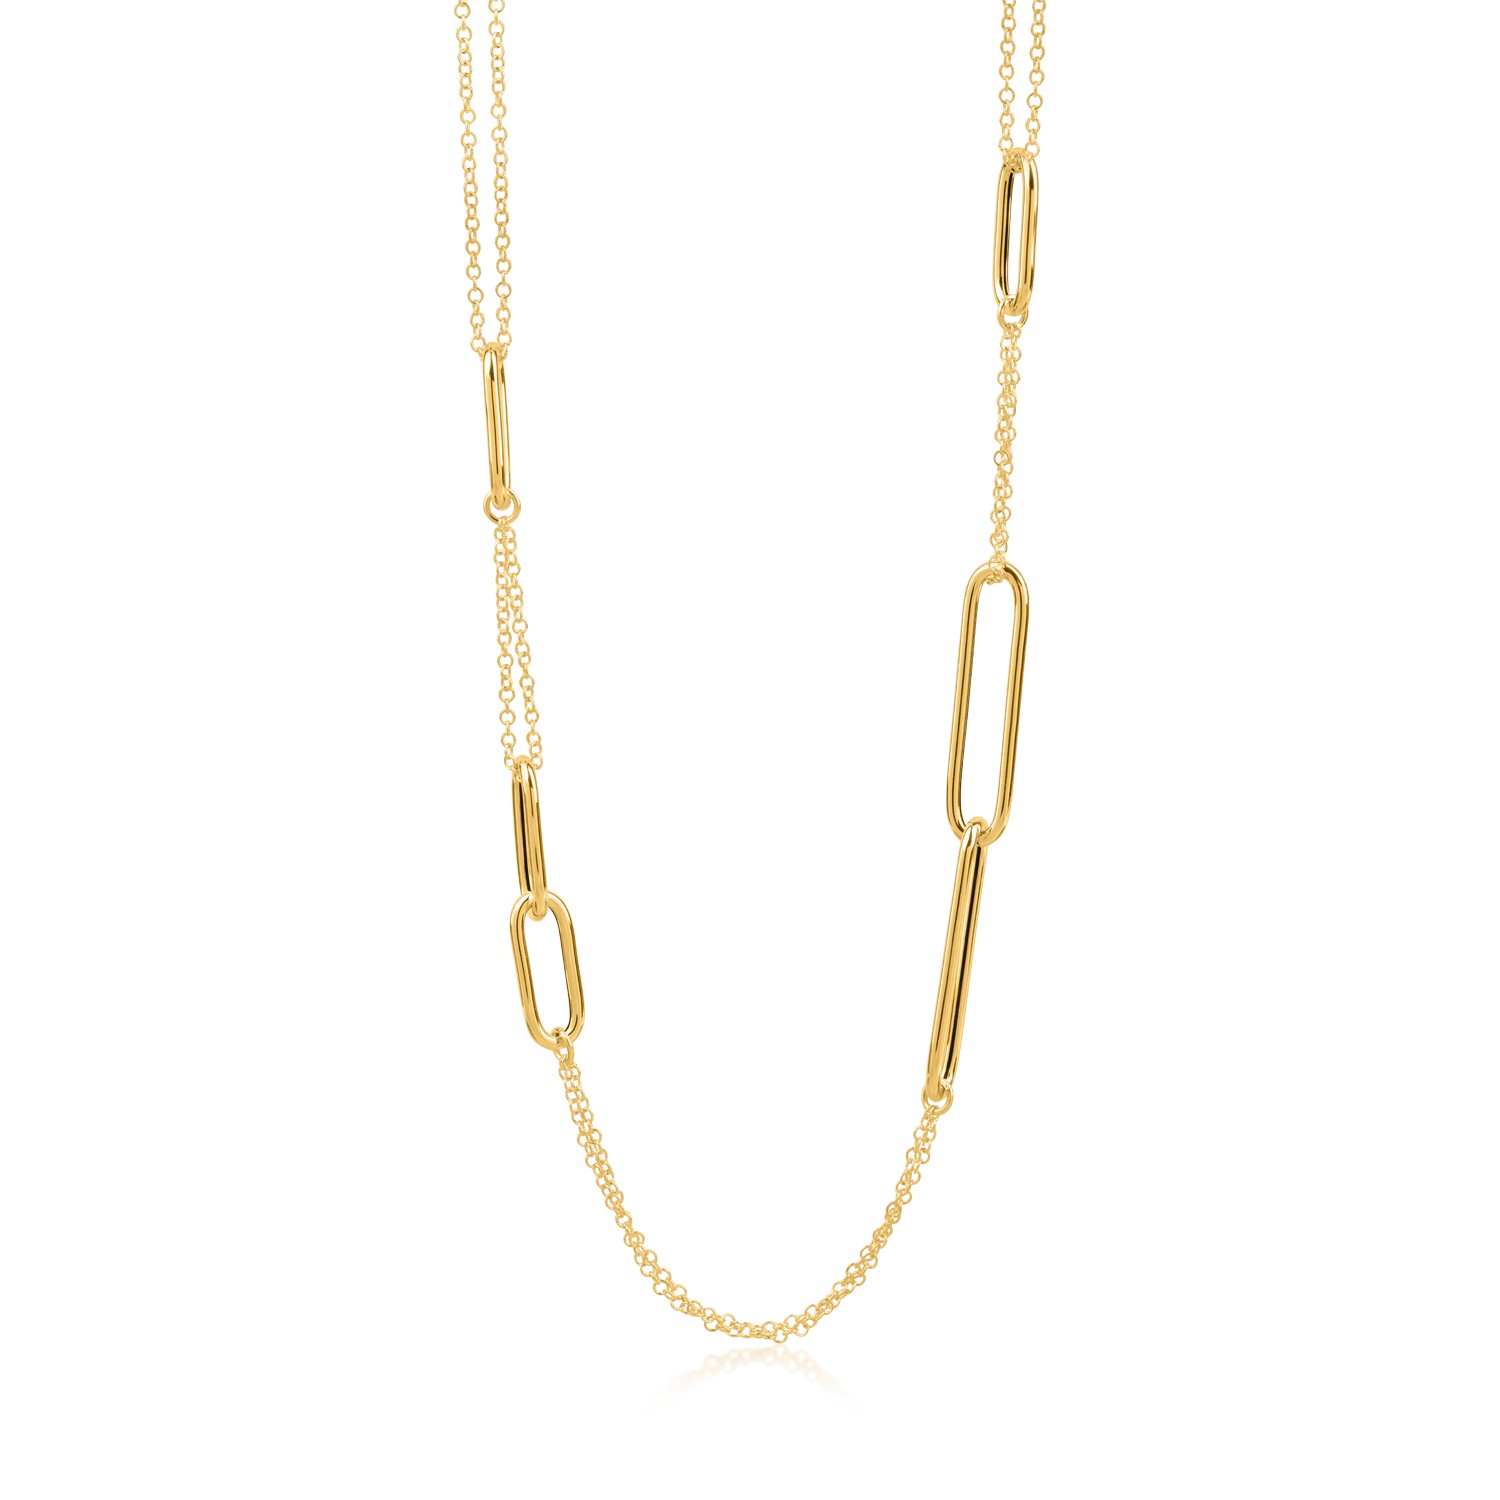 Yellow gold chain with geometric details